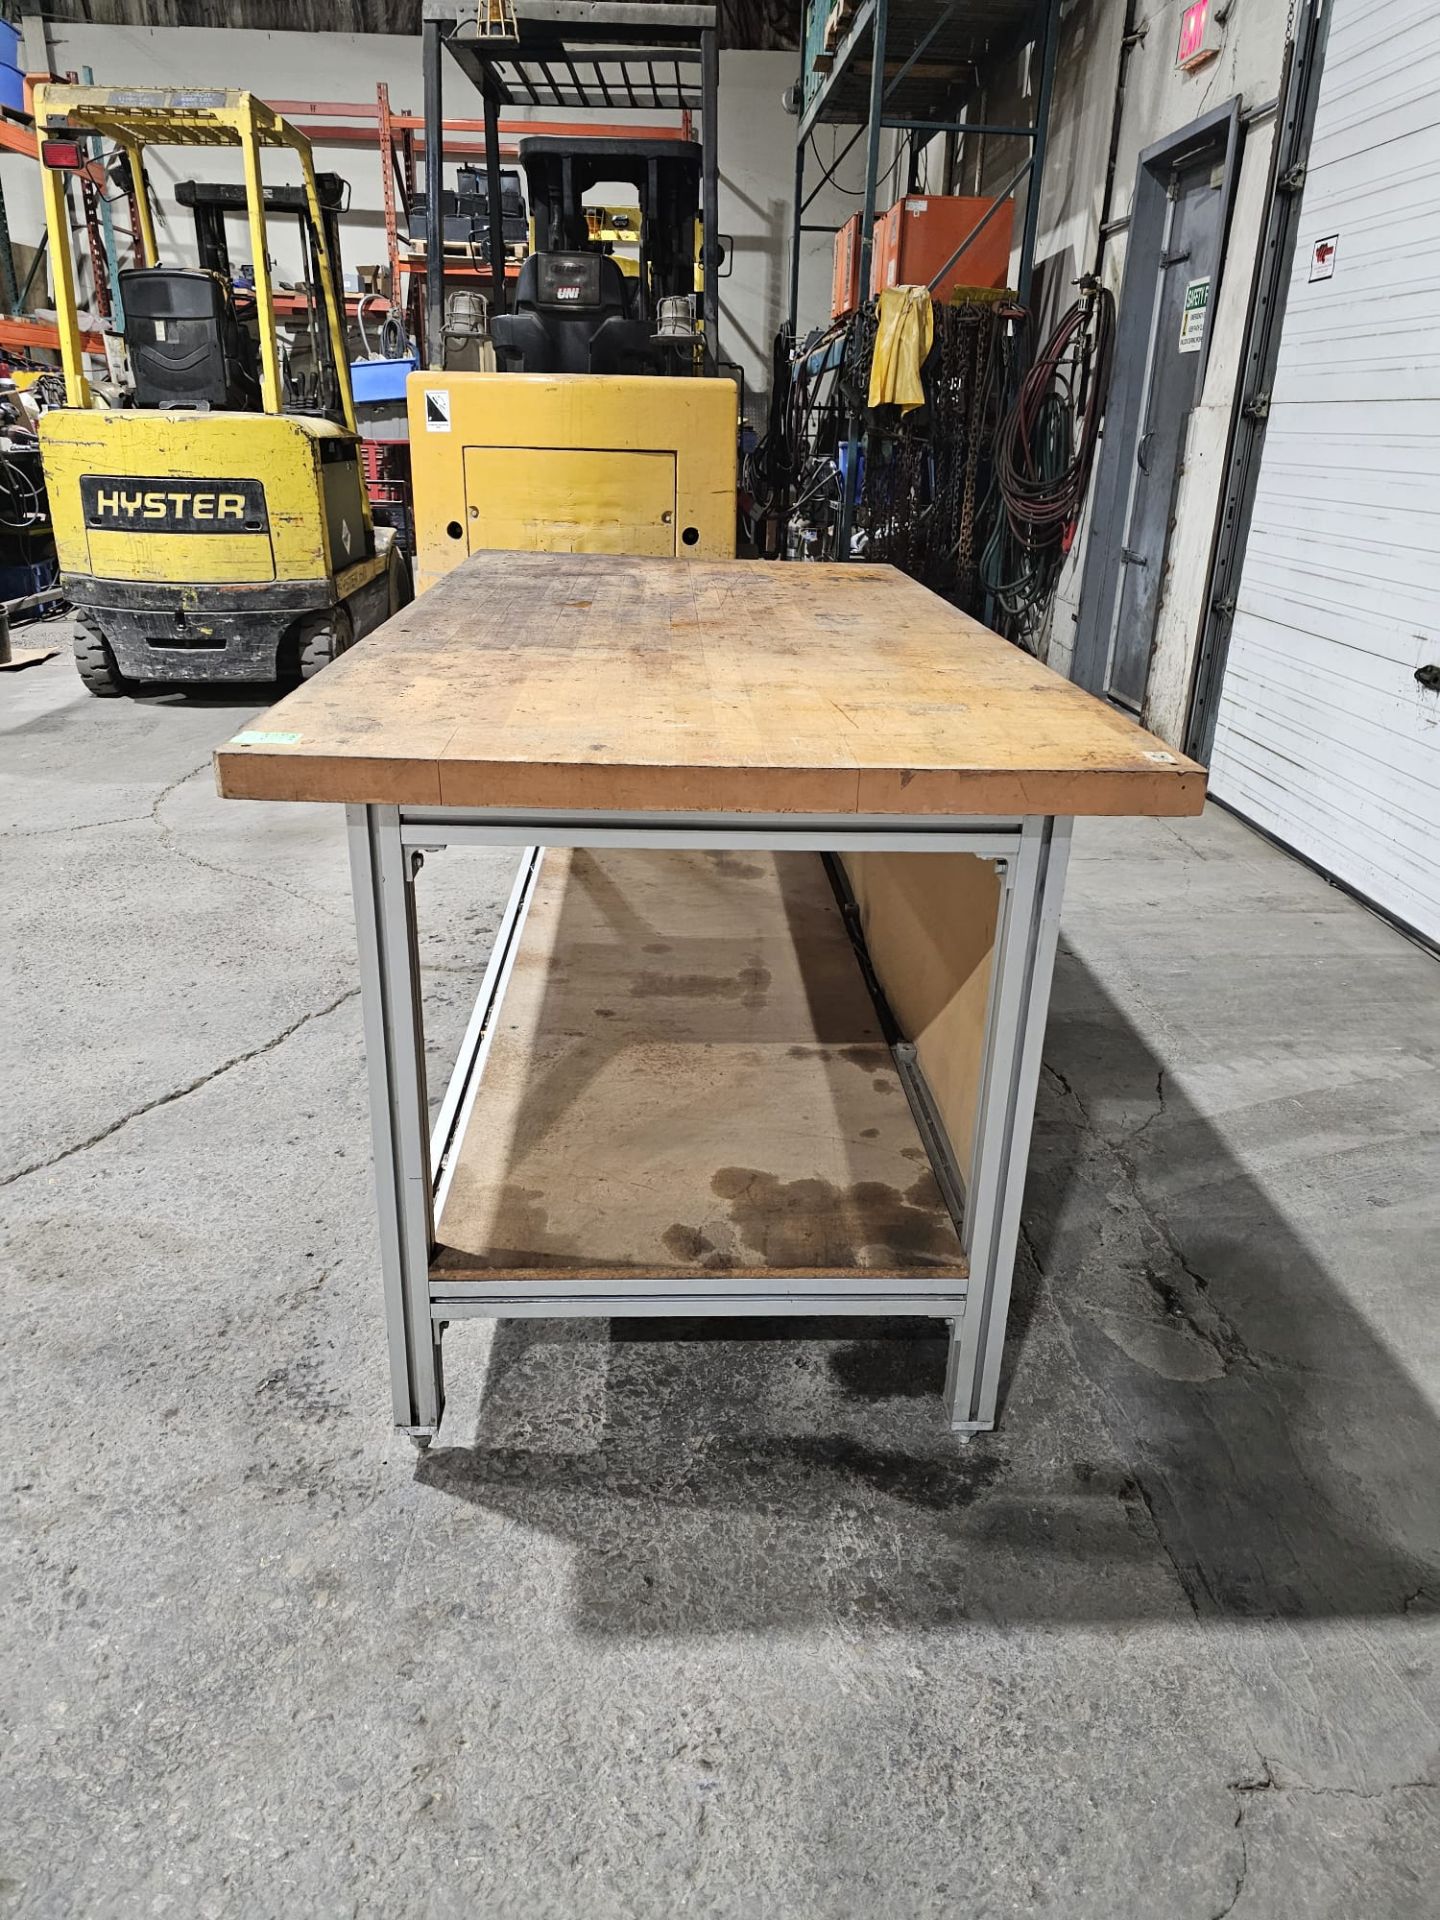 Table 36" x 72" x 34.5"h bottom shelf: 24" w x 69" - Aluminum frame with wooden top - Image 5 of 6